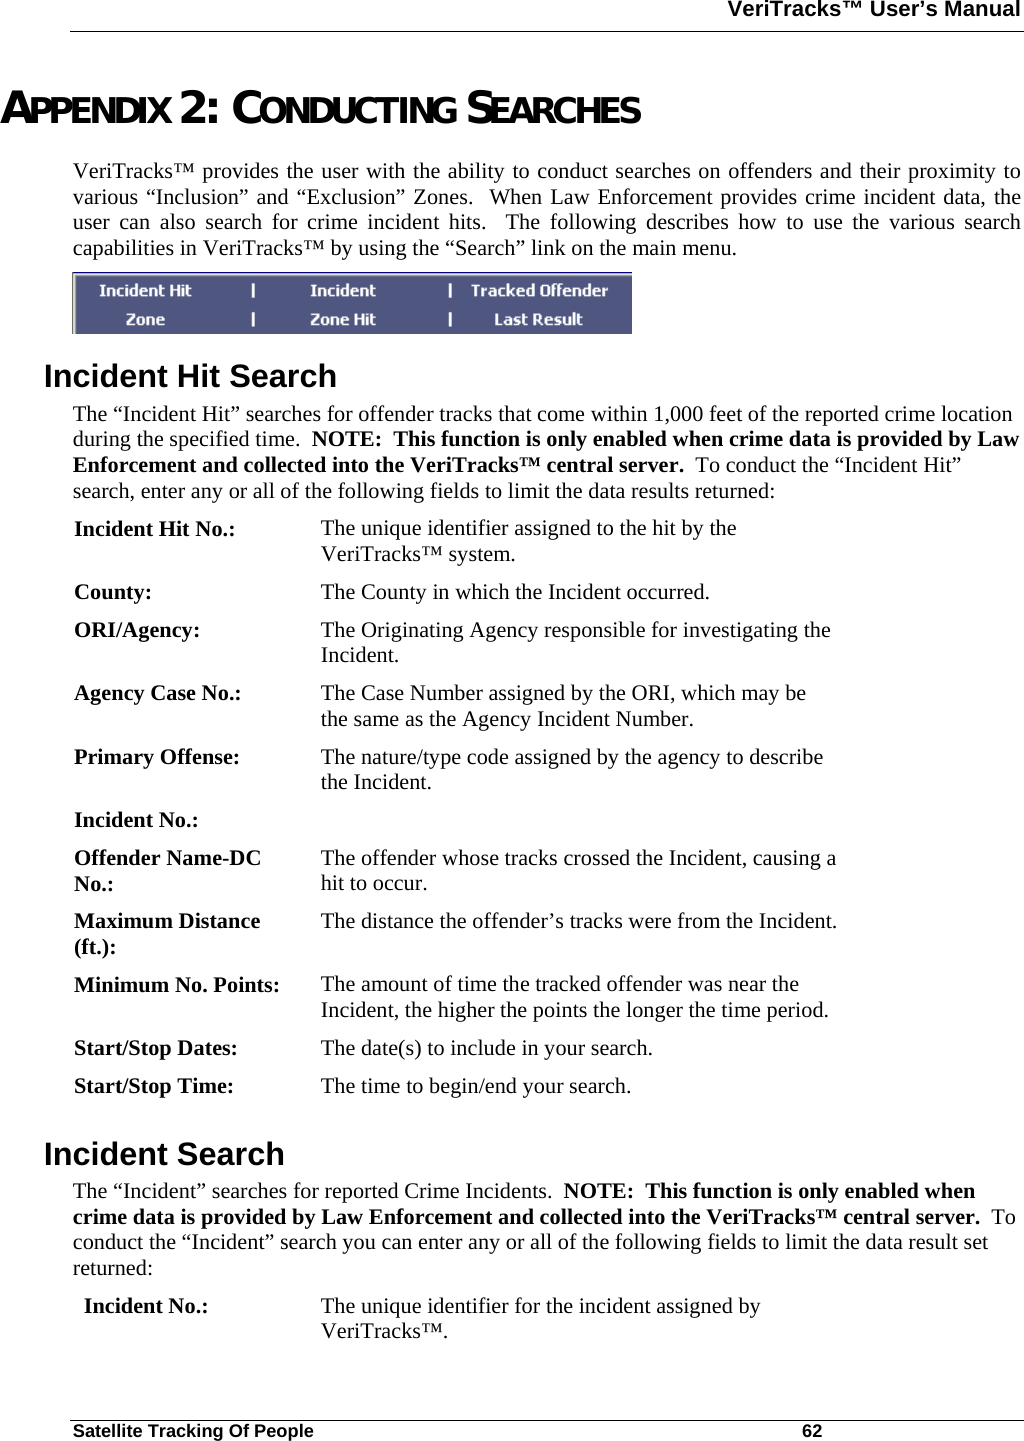 VeriTracks™ User’s Manual  Satellite Tracking Of People       62 APPENDIX 2: CONDUCTING SEARCHES VeriTracks™ provides the user with the ability to conduct searches on offenders and their proximity to various “Inclusion” and “Exclusion” Zones.  When Law Enforcement provides crime incident data, the user can also search for crime incident hits.  The following describes how to use the various search capabilities in VeriTracks™ by using the “Search” link on the main menu.  Incident Hit Search The “Incident Hit” searches for offender tracks that come within 1,000 feet of the reported crime location during the specified time.  NOTE:  This function is only enabled when crime data is provided by Law Enforcement and collected into the VeriTracks™ central server.  To conduct the “Incident Hit” search, enter any or all of the following fields to limit the data results returned: Incident Hit No.:  The unique identifier assigned to the hit by the VeriTracks™ system. County:  The County in which the Incident occurred. ORI/Agency:  The Originating Agency responsible for investigating the Incident. Agency Case No.:  The Case Number assigned by the ORI, which may be the same as the Agency Incident Number. Primary Offense:  The nature/type code assigned by the agency to describe the Incident. Incident No.:   Offender Name-DC No.:  The offender whose tracks crossed the Incident, causing a hit to occur. Maximum Distance (ft.):  The distance the offender’s tracks were from the Incident. Minimum No. Points:  The amount of time the tracked offender was near the Incident, the higher the points the longer the time period.   Start/Stop Dates:  The date(s) to include in your search. Start/Stop Time:  The time to begin/end your search. Incident Search The “Incident” searches for reported Crime Incidents.  NOTE:  This function is only enabled when crime data is provided by Law Enforcement and collected into the VeriTracks™ central server.  To conduct the “Incident” search you can enter any or all of the following fields to limit the data result set returned: Incident No.:  The unique identifier for the incident assigned by VeriTracks™. 